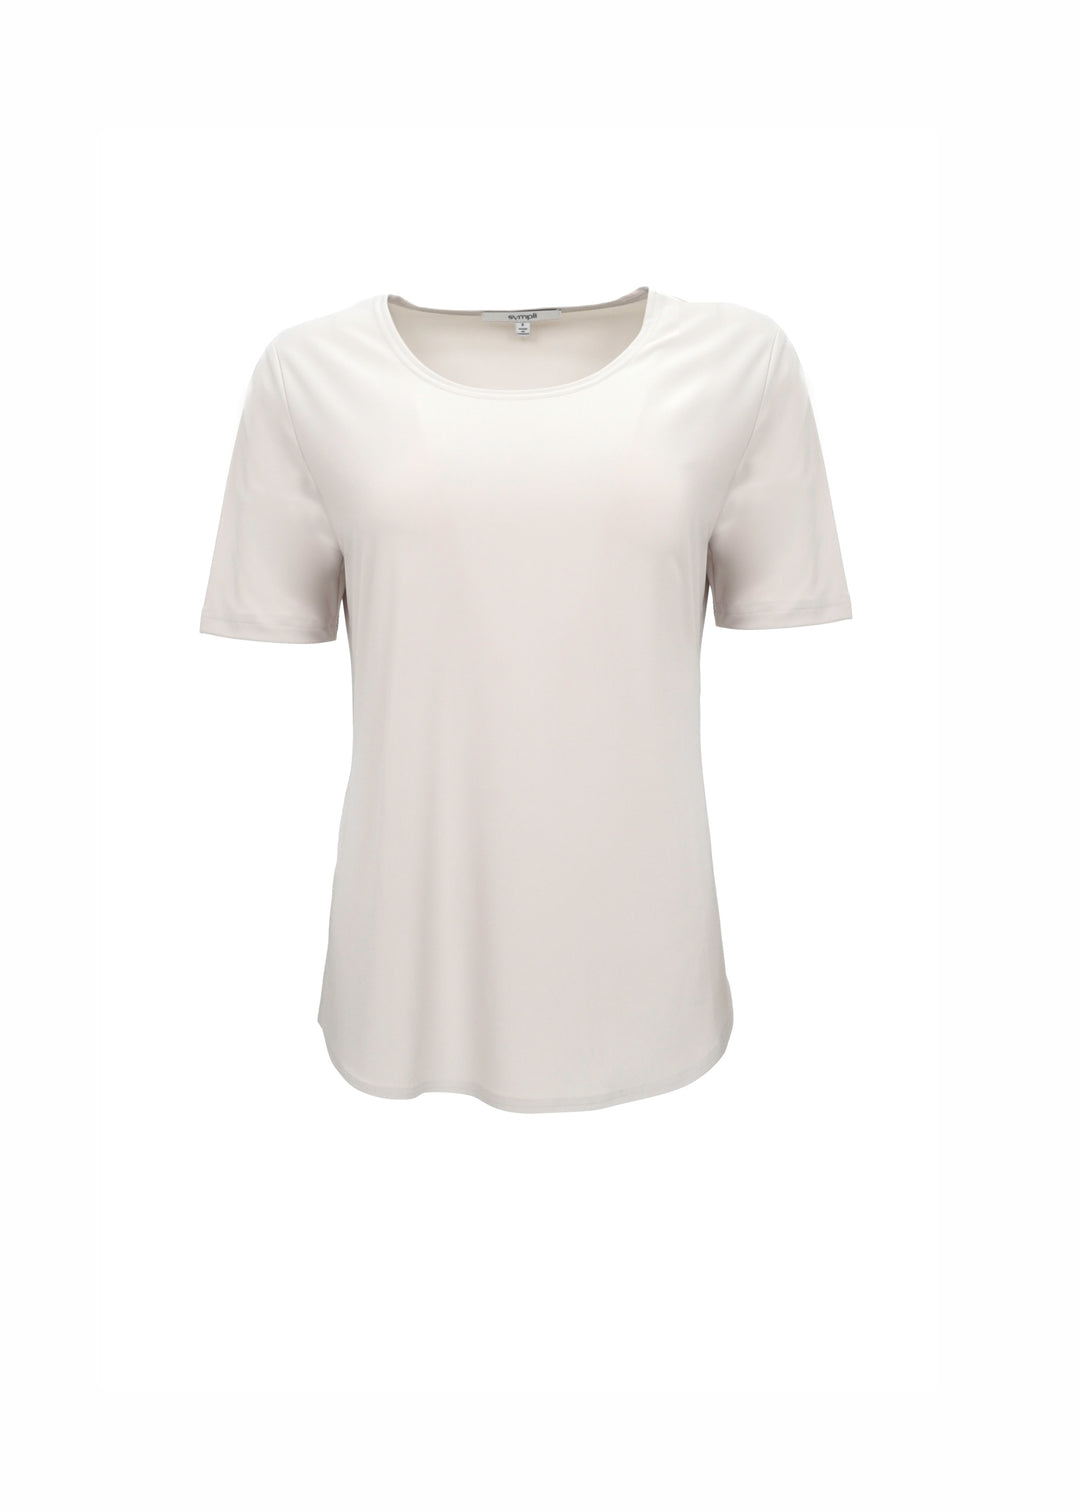 Sympli - Short Sleeve Go To Classic T Relax